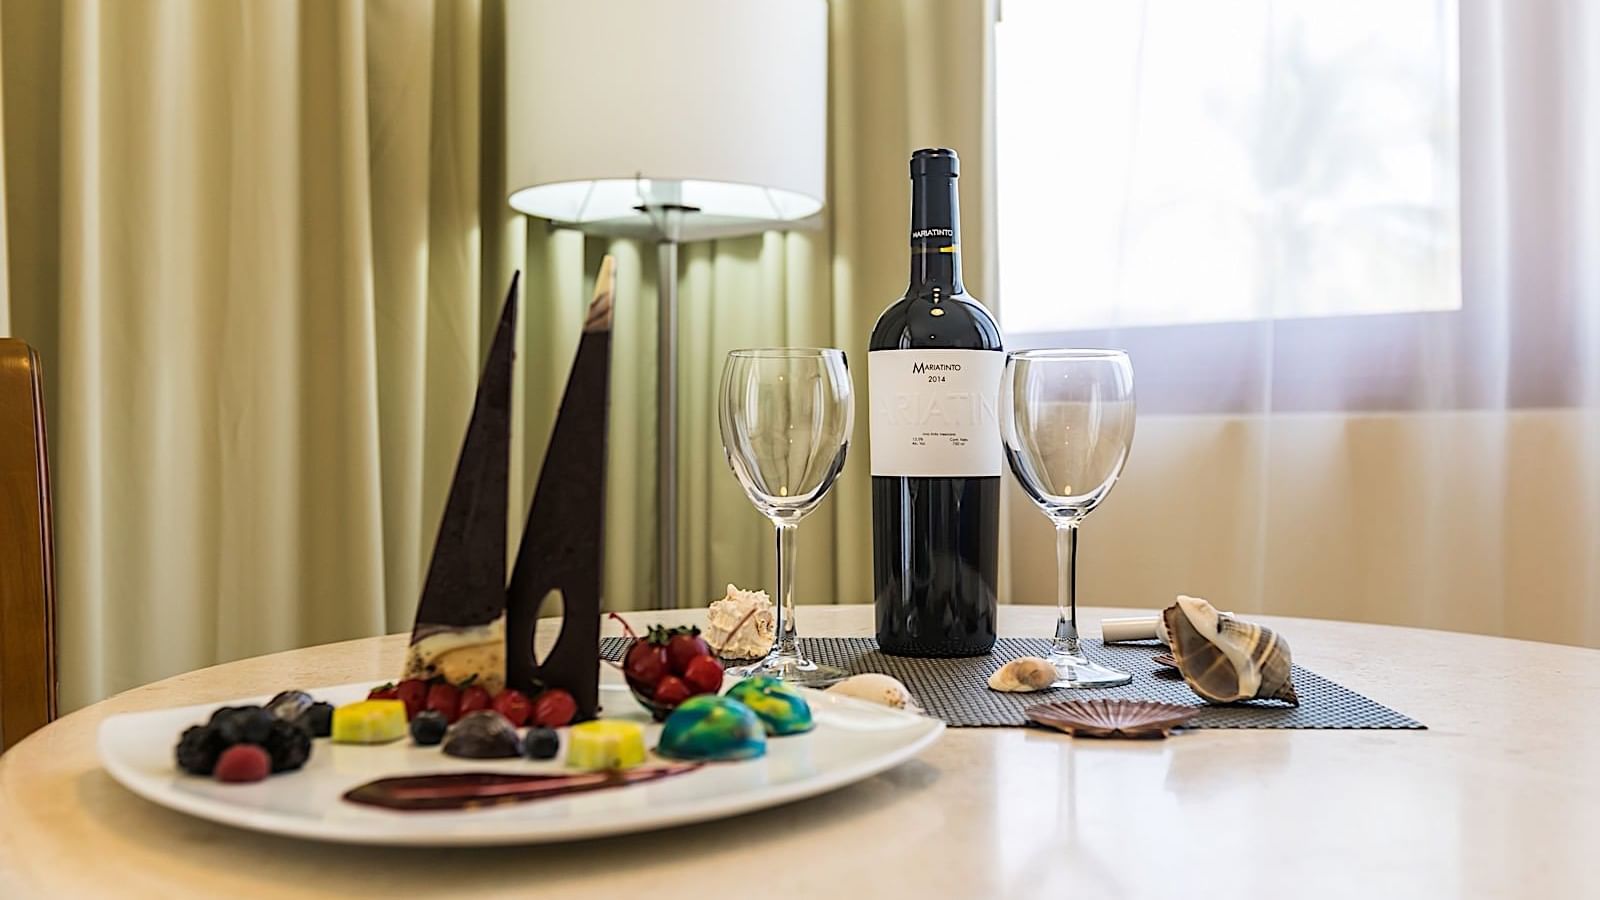 Fruit platter and wine given in Junior Suite King Ocean View Room at Pierre Mundo Imperial